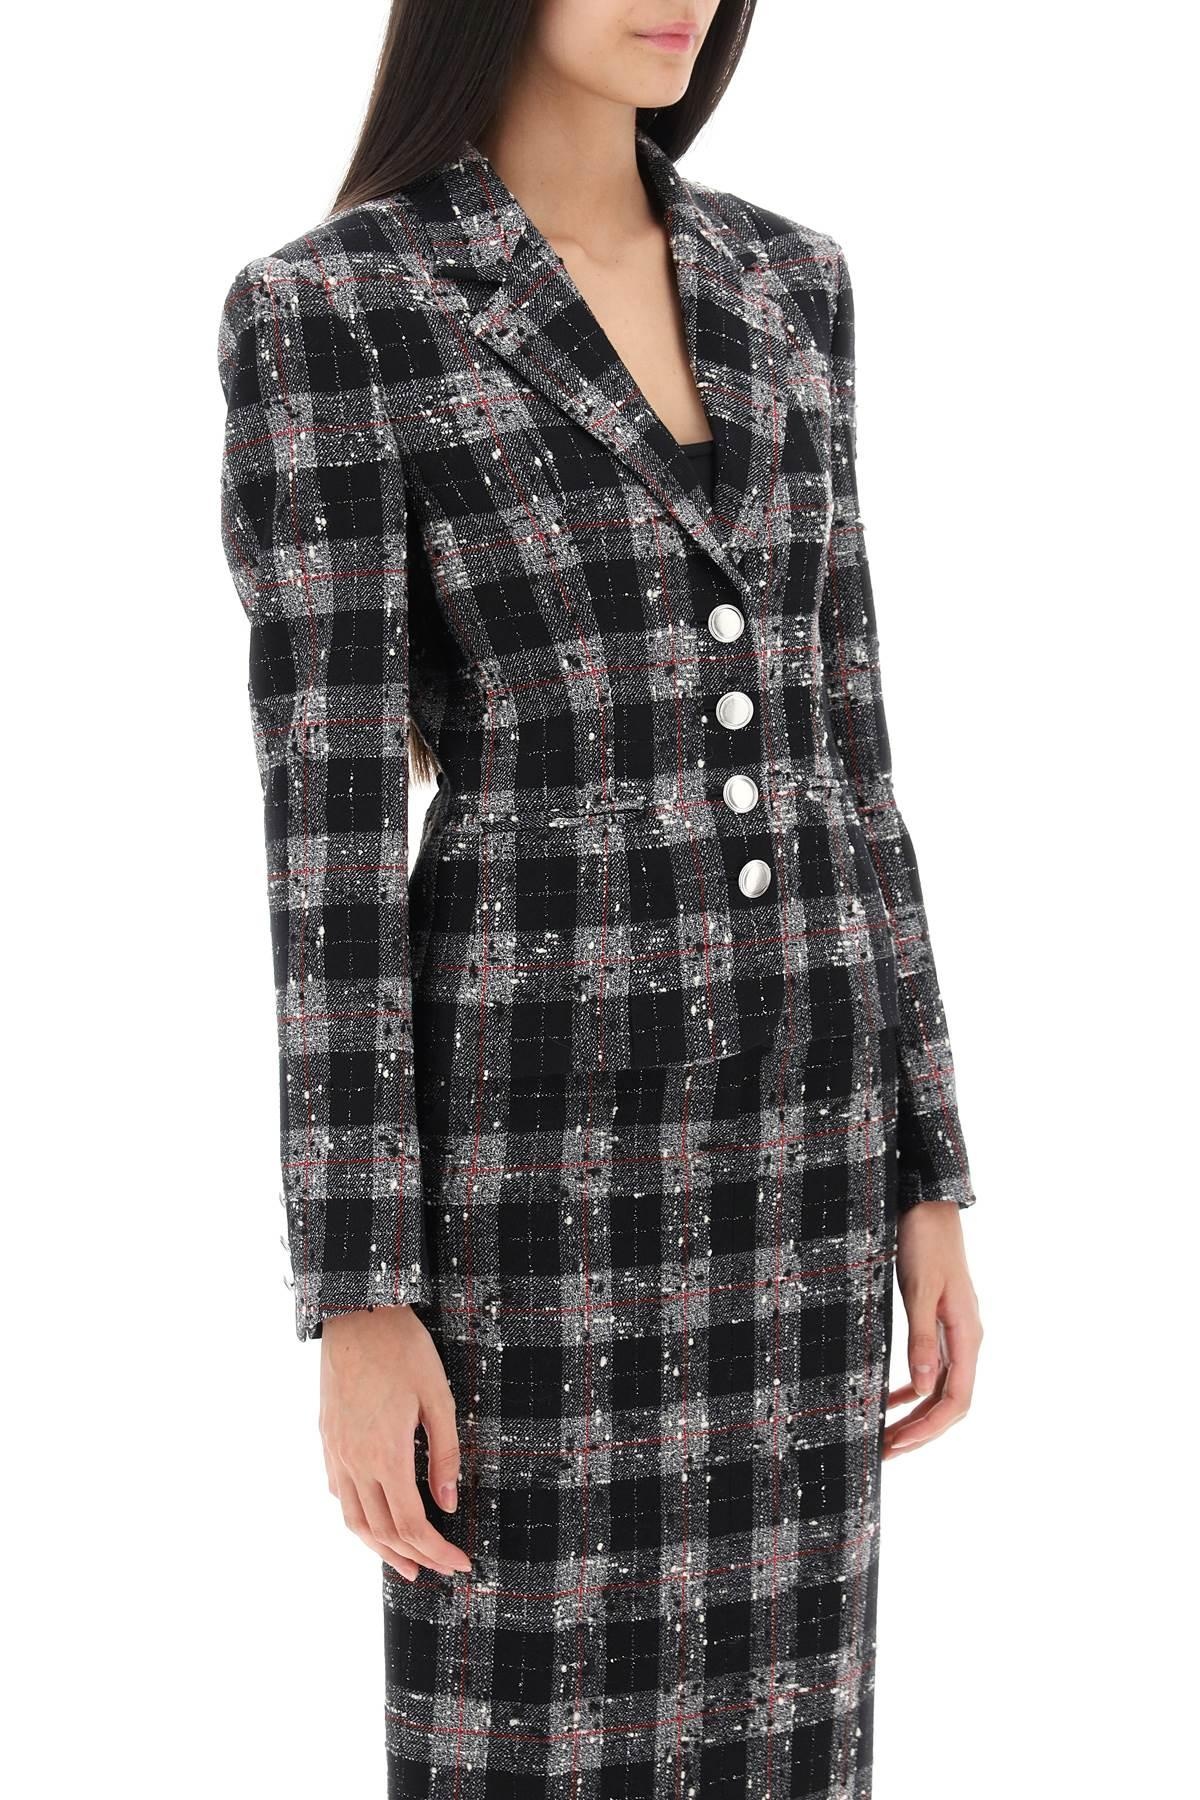 Alessandra Rich Single Breasted Jacket In Boucle' Fabric With Check Motif - 3